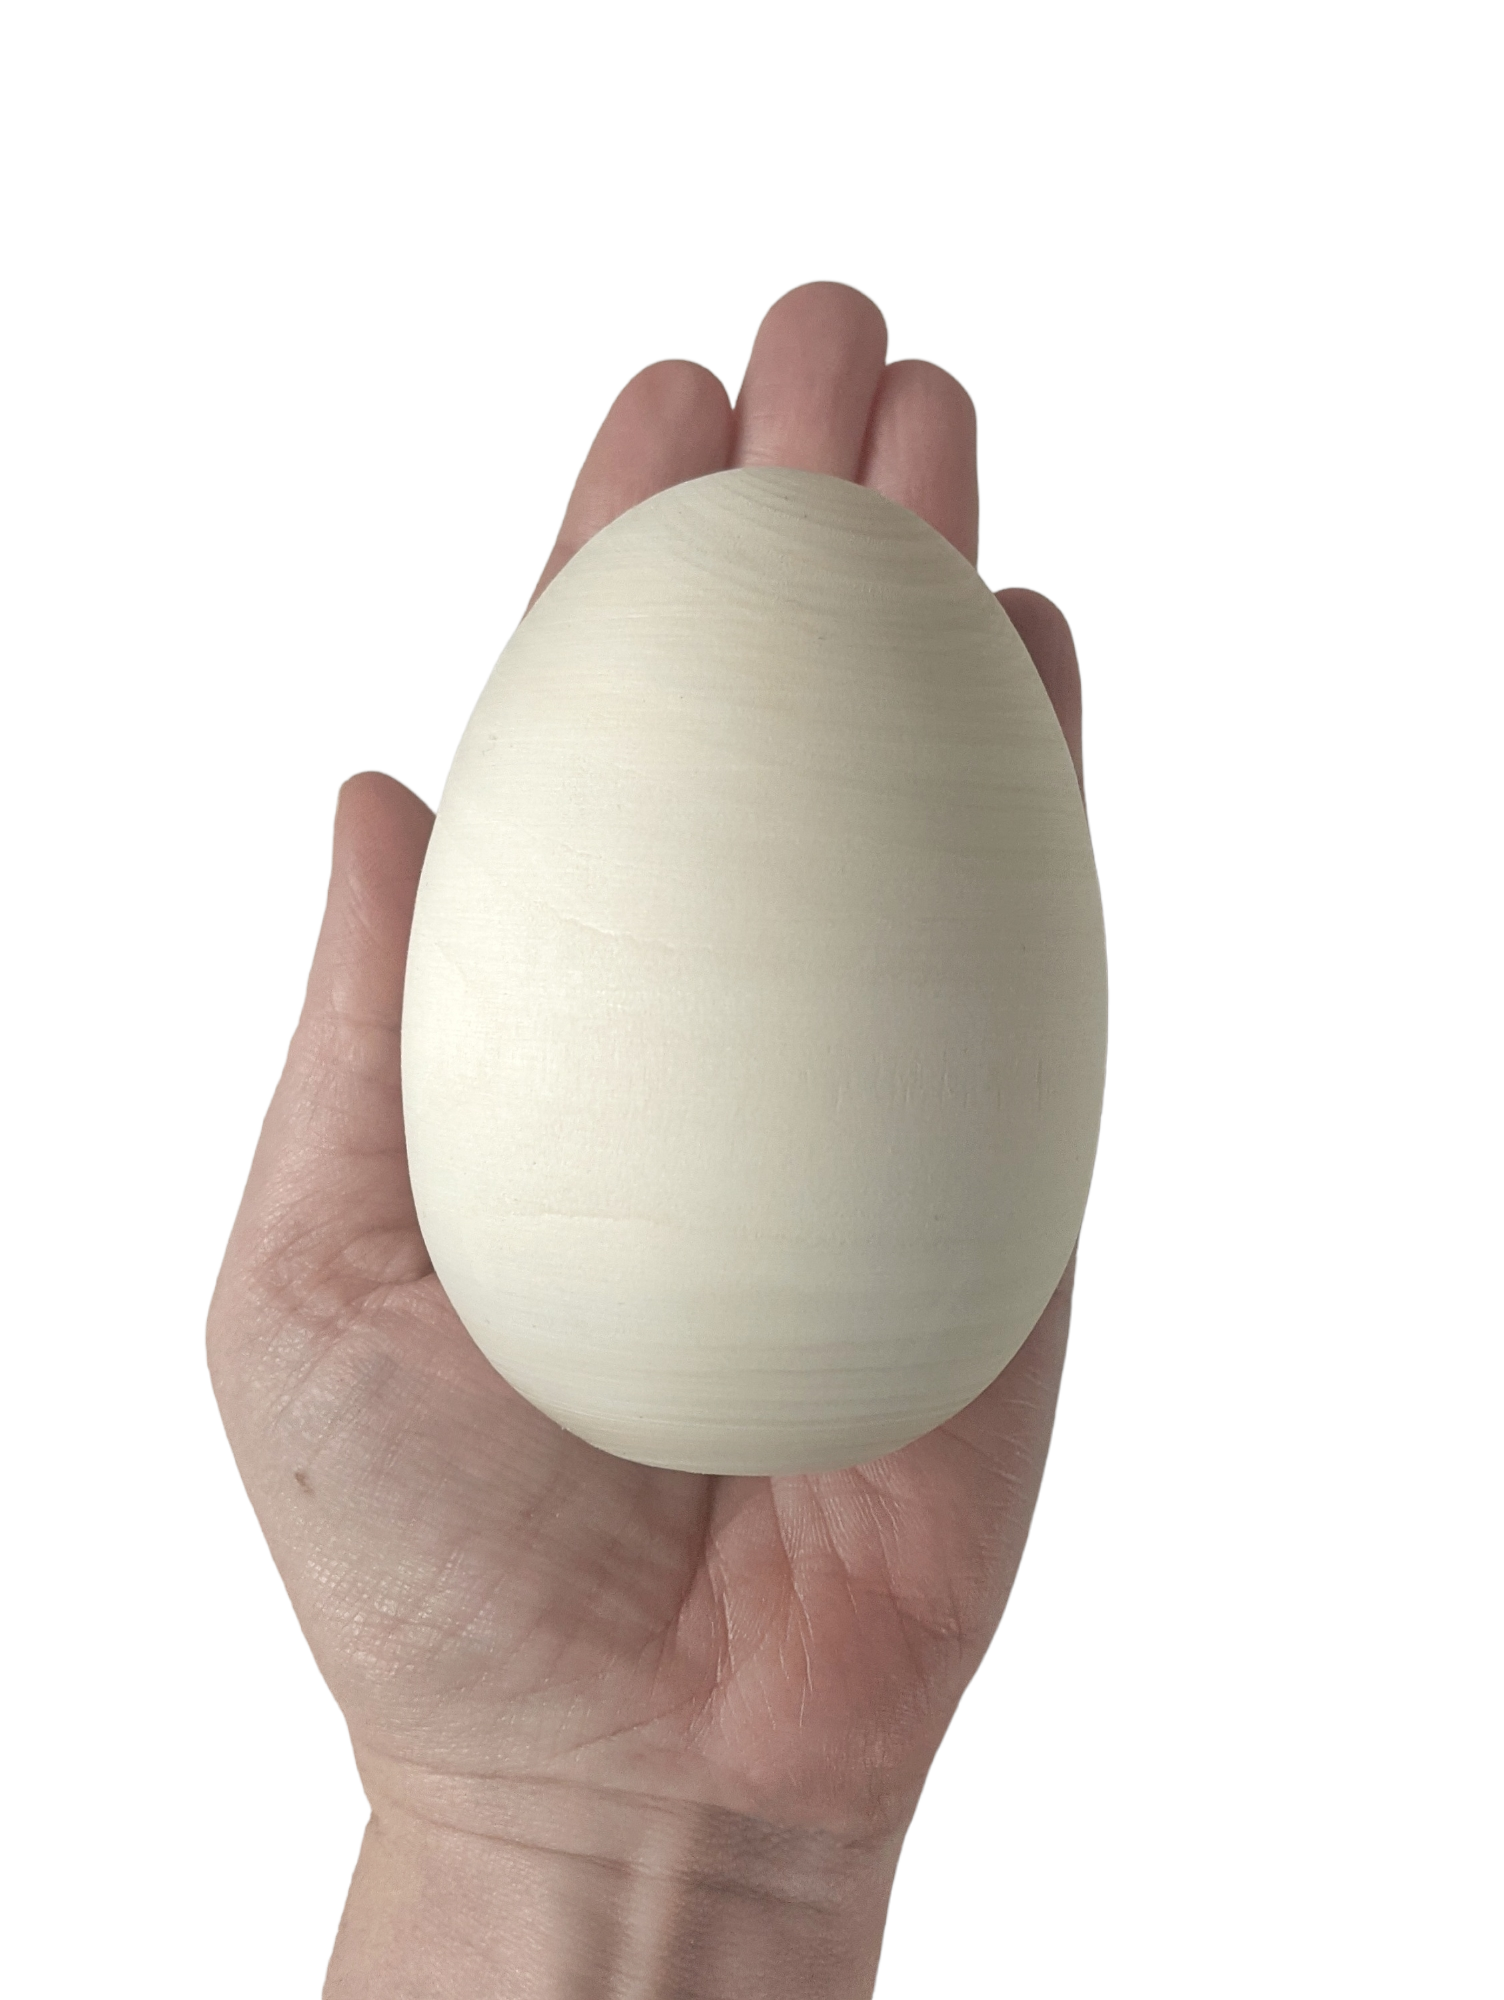 Wooden Eggs Unfinished Flat Bottom, Multiple Sizes Available